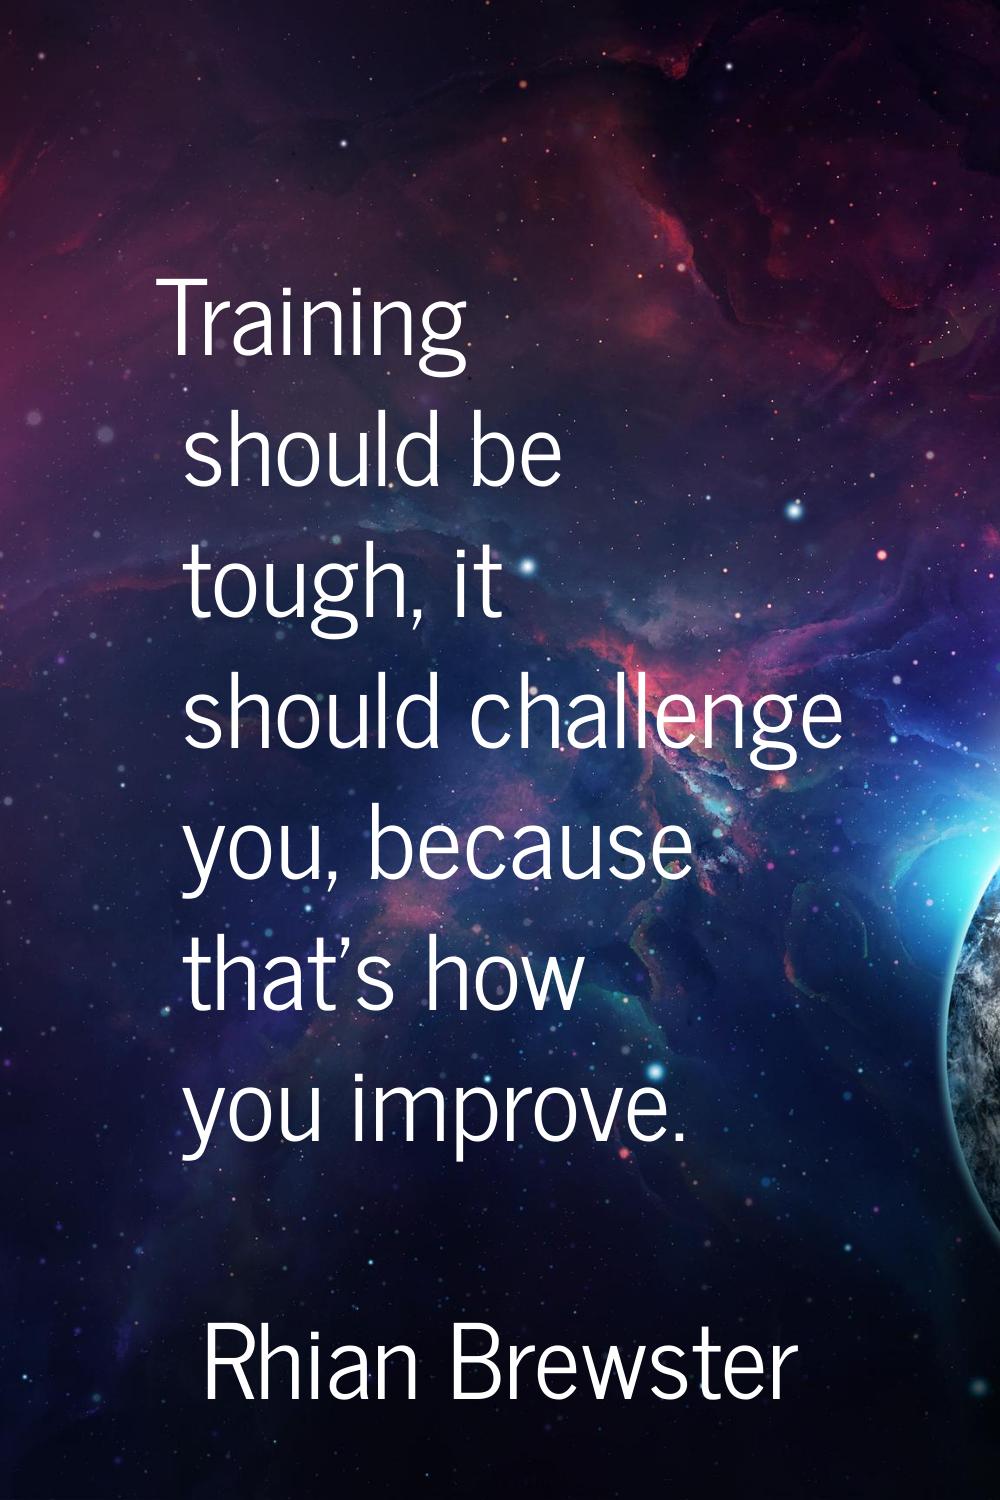 Training should be tough, it should challenge you, because that's how you improve.